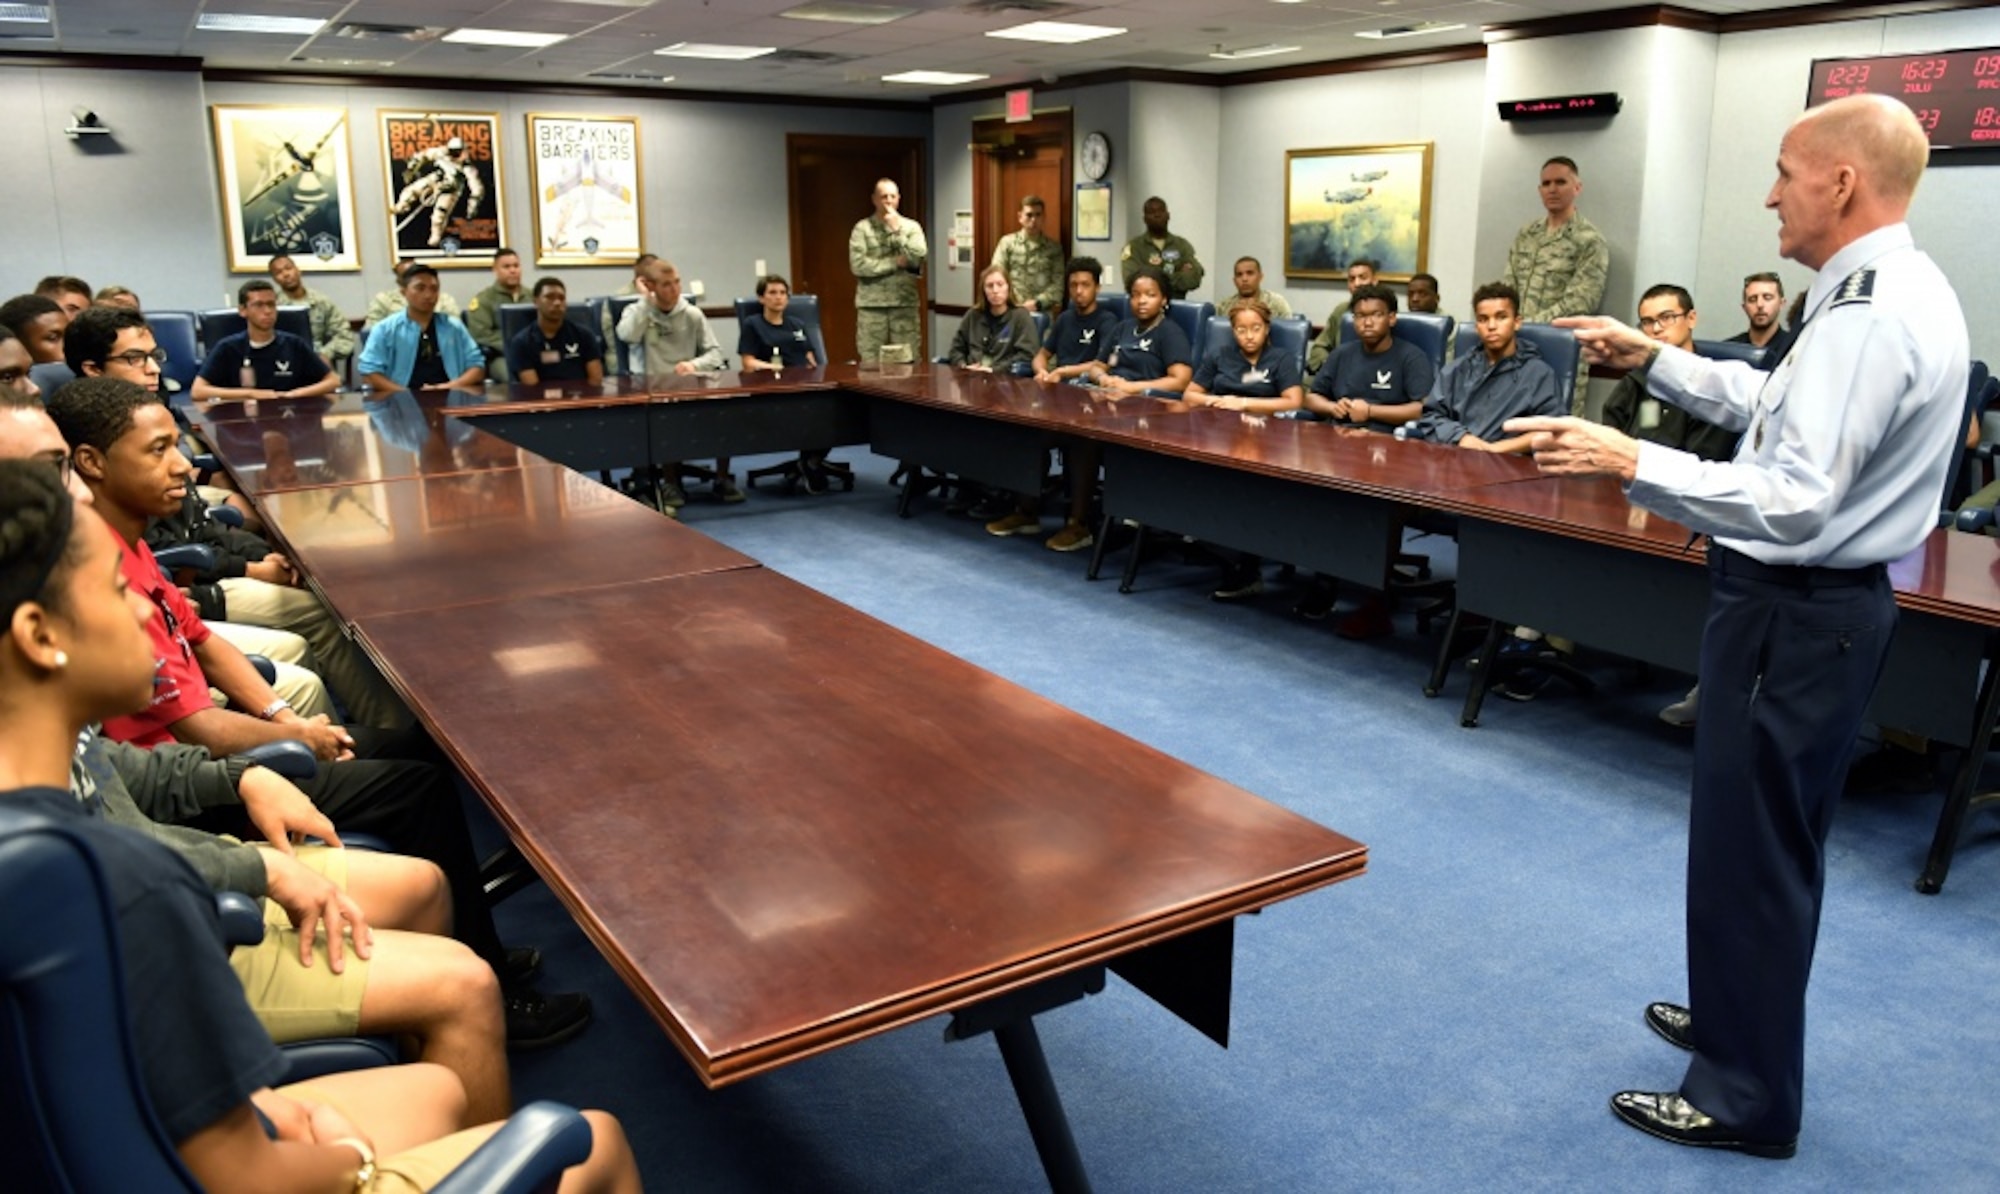 Air Force Vice Chief of Staff Gen. Stephen W. Wilson speaks with trainees from the Aviation Character Education Flight Program, the Pentagon, Arlington, Va., Aug. 1, 2018. The ACE program is a unique mentorship and motivational program for high school students and Air Force cadets. (U.S. Air Force photo by Wayne A. Clark)